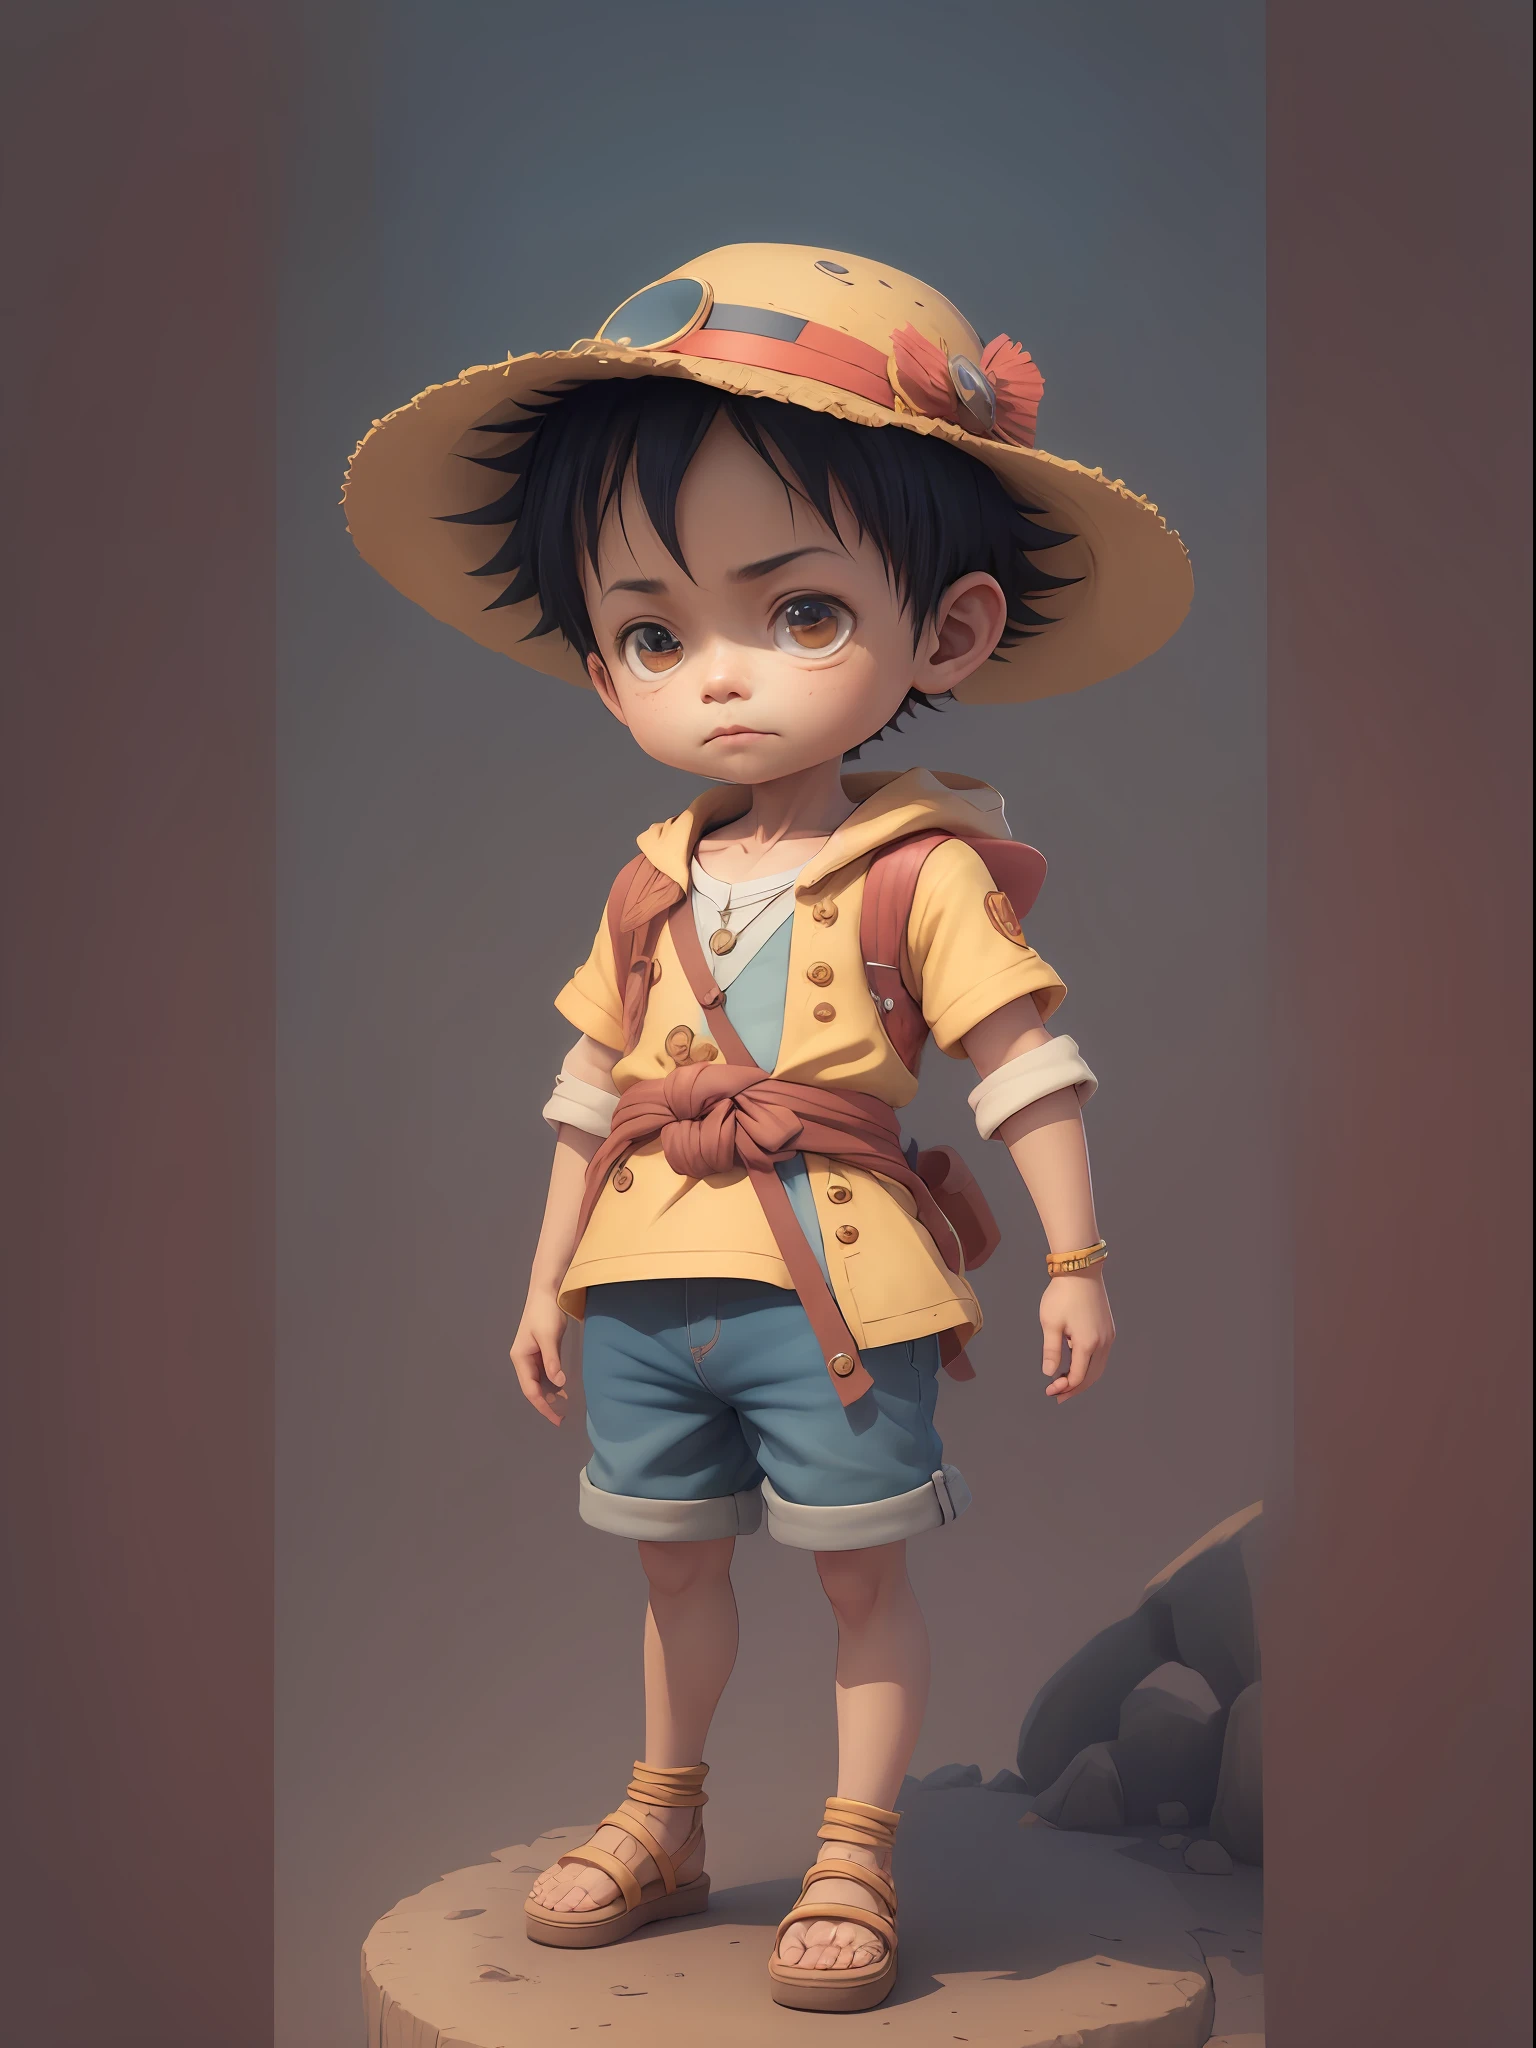 1boy, solo, cute 3d render, cute detailed digital art, male explorer mini cute boy, cute digital painting, stylized 3d render, cute digital art, cute render 3d anime boy, luffy the little pirate looks up, cute! c4d, portrait anime sea pirate boy, he is wearing an open long-sleeved red cardigan with four buttons, with a yellow sash tied around his waist, blue shorts with cuffs, sandals.